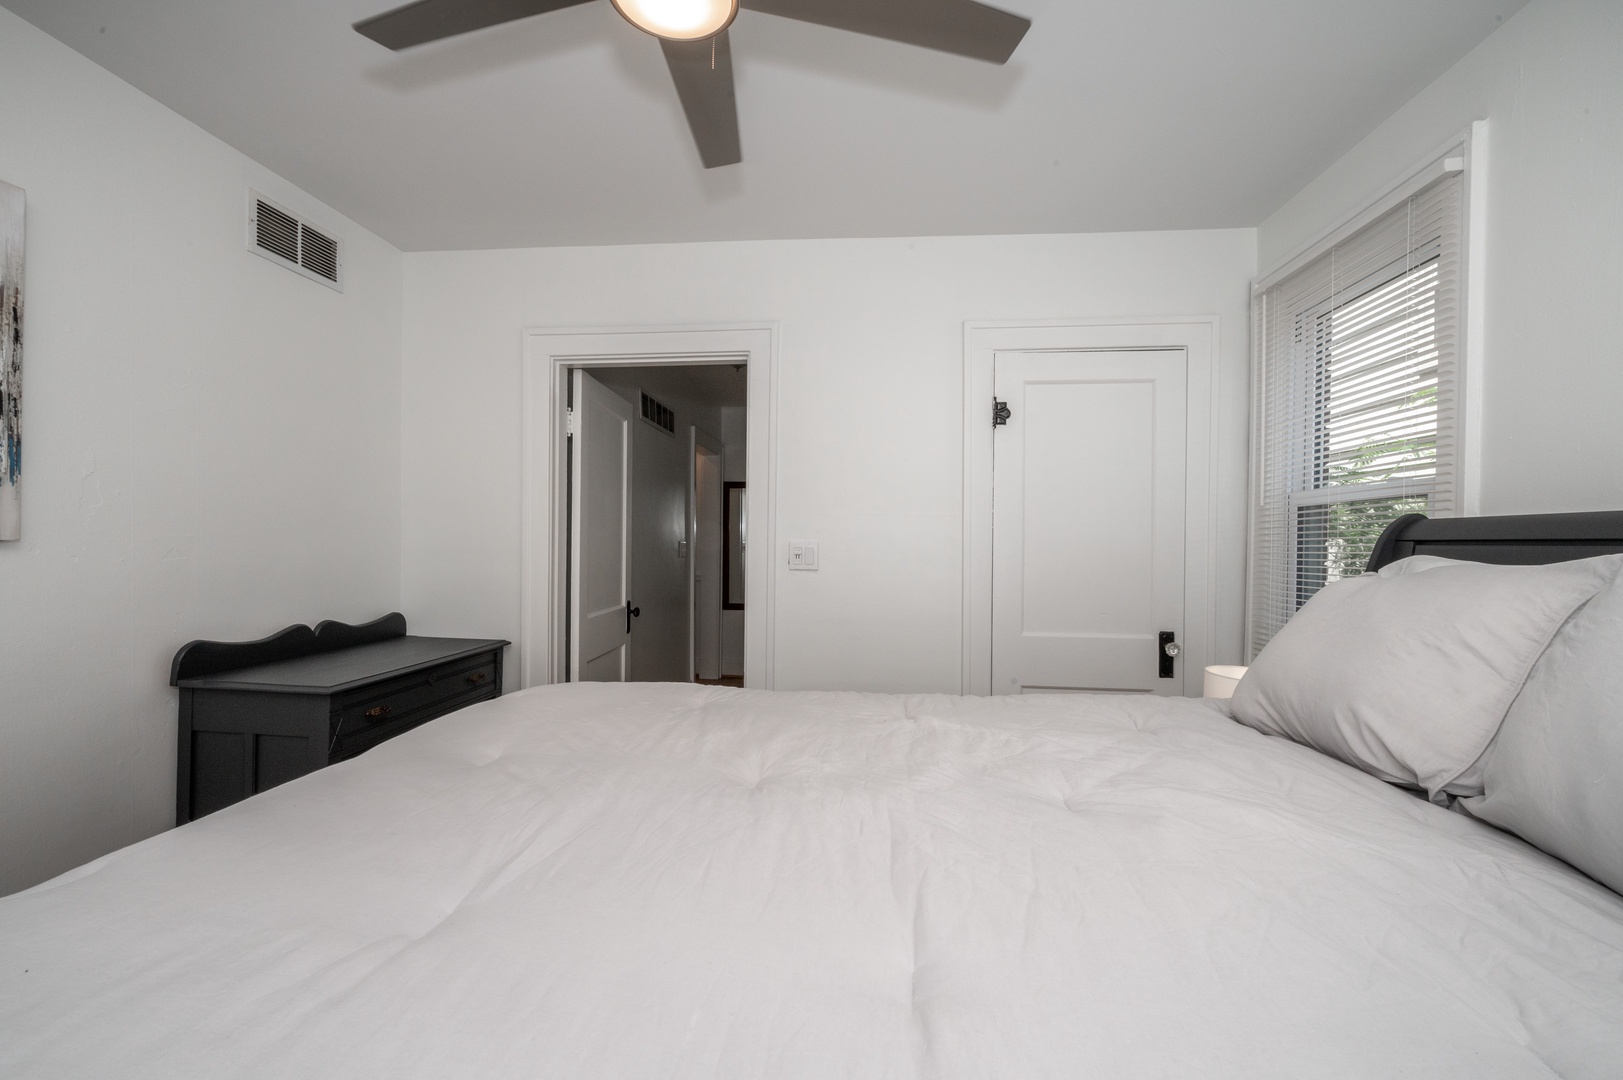 Unit 1 – The tranquil queen bedroom includes a ceiling fan & standing mirror